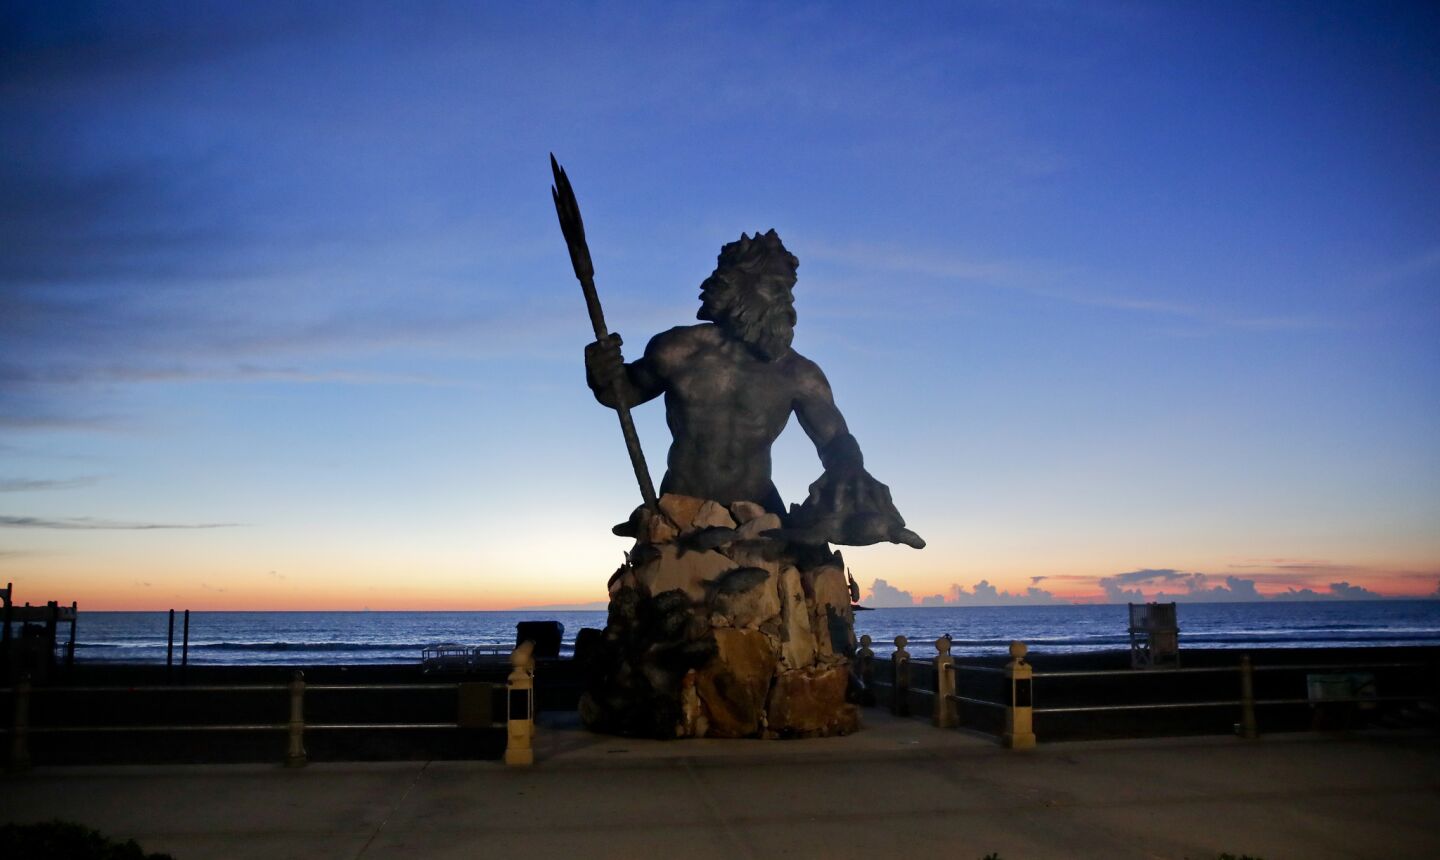 The bronze statue of Neptune stands with the sunrise behind, Wednesday, Sept. 12, 2018, in Virginia Beach, Va., as Hurricane Florence moves towards eastern shore.